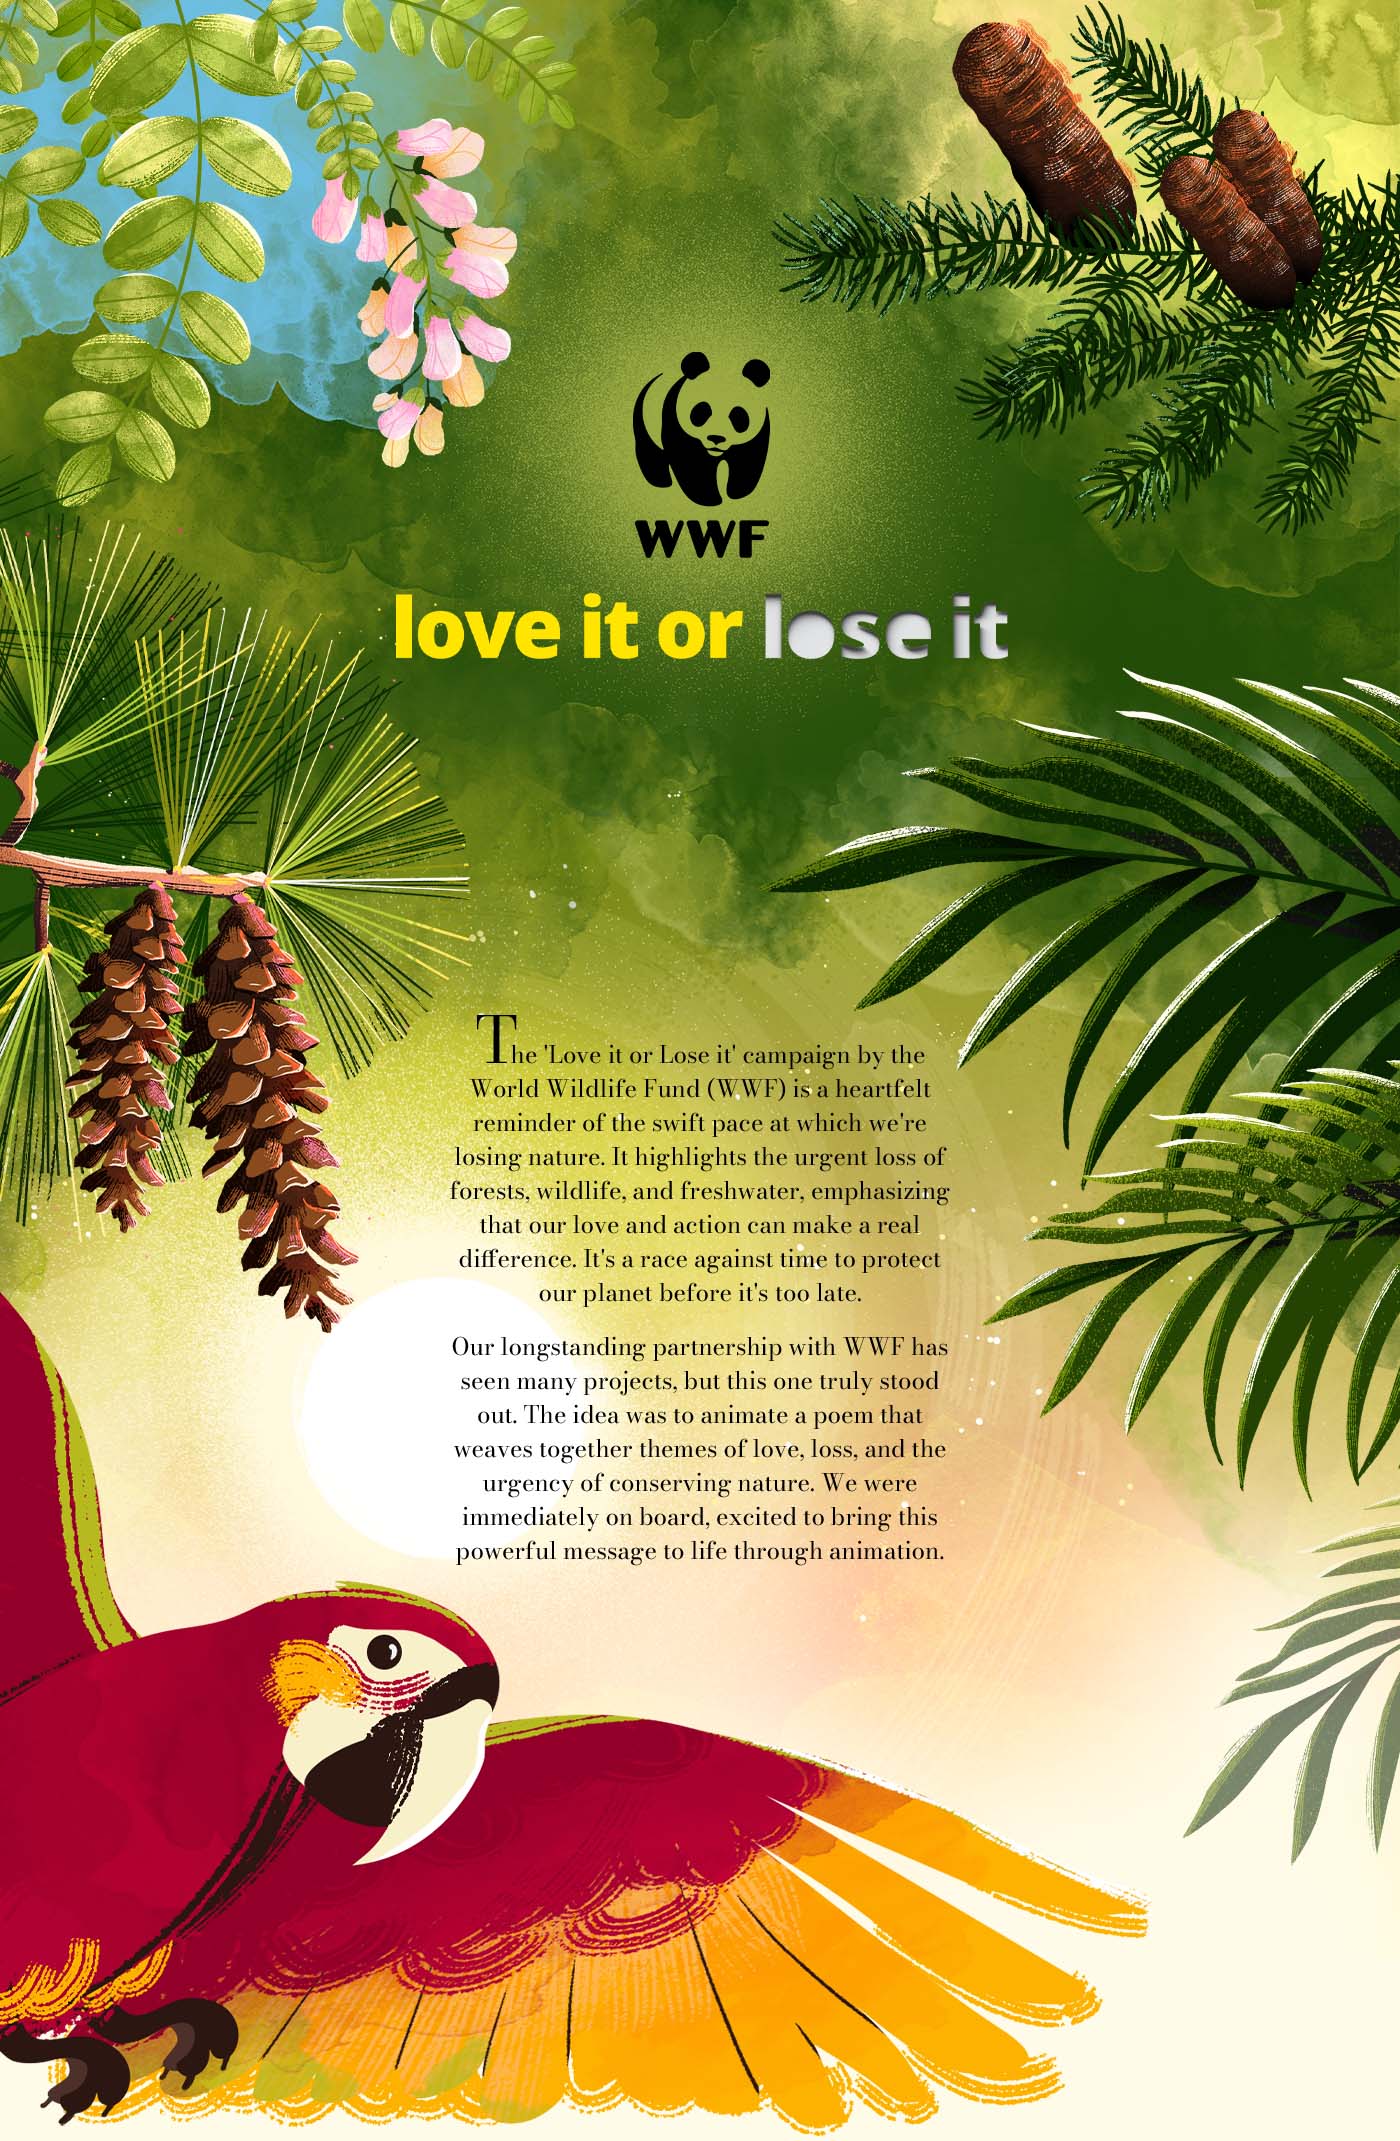 WWF - we highlight the urgent loss of nature